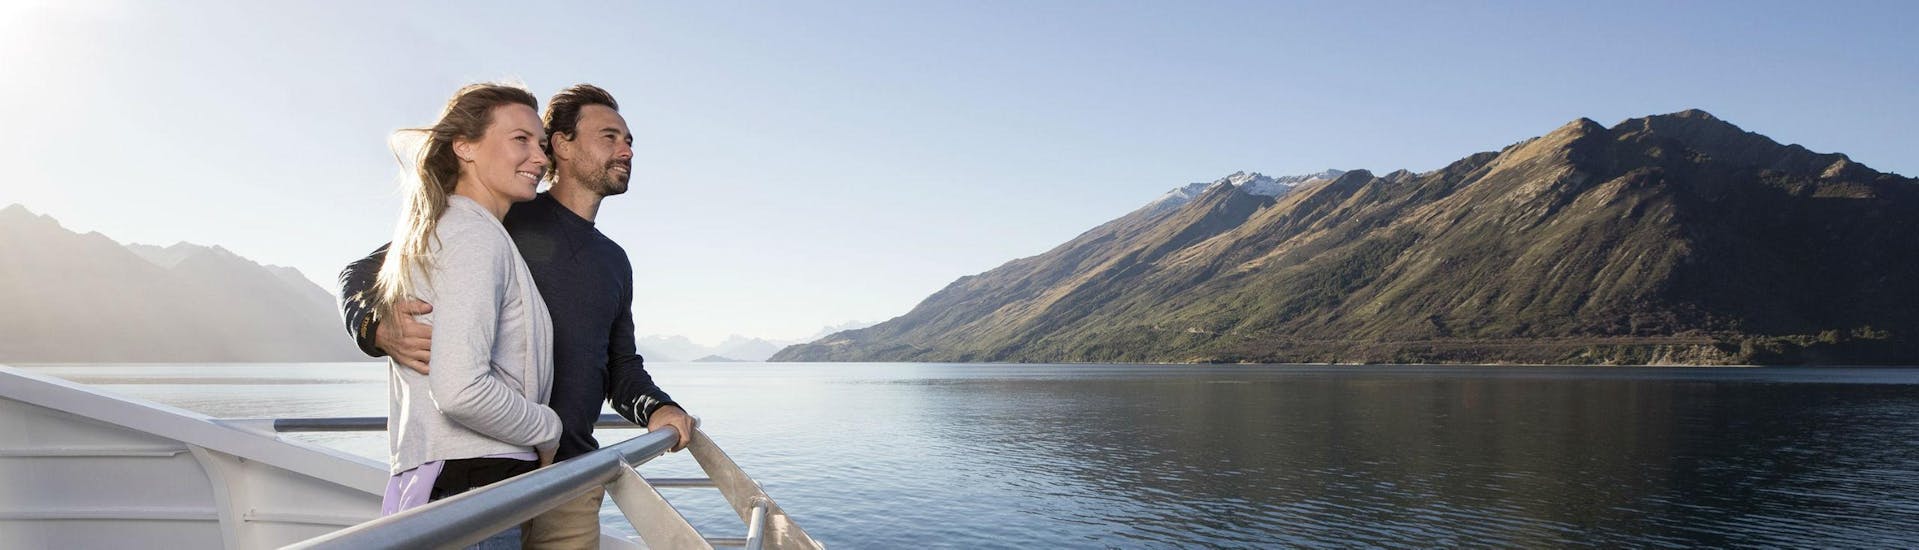 A couple is enjoying the view from the catamaran's viewing deck during the Spirit of Queenstown Cruise on Lake Wakatipu organised by Southern Discoveries.